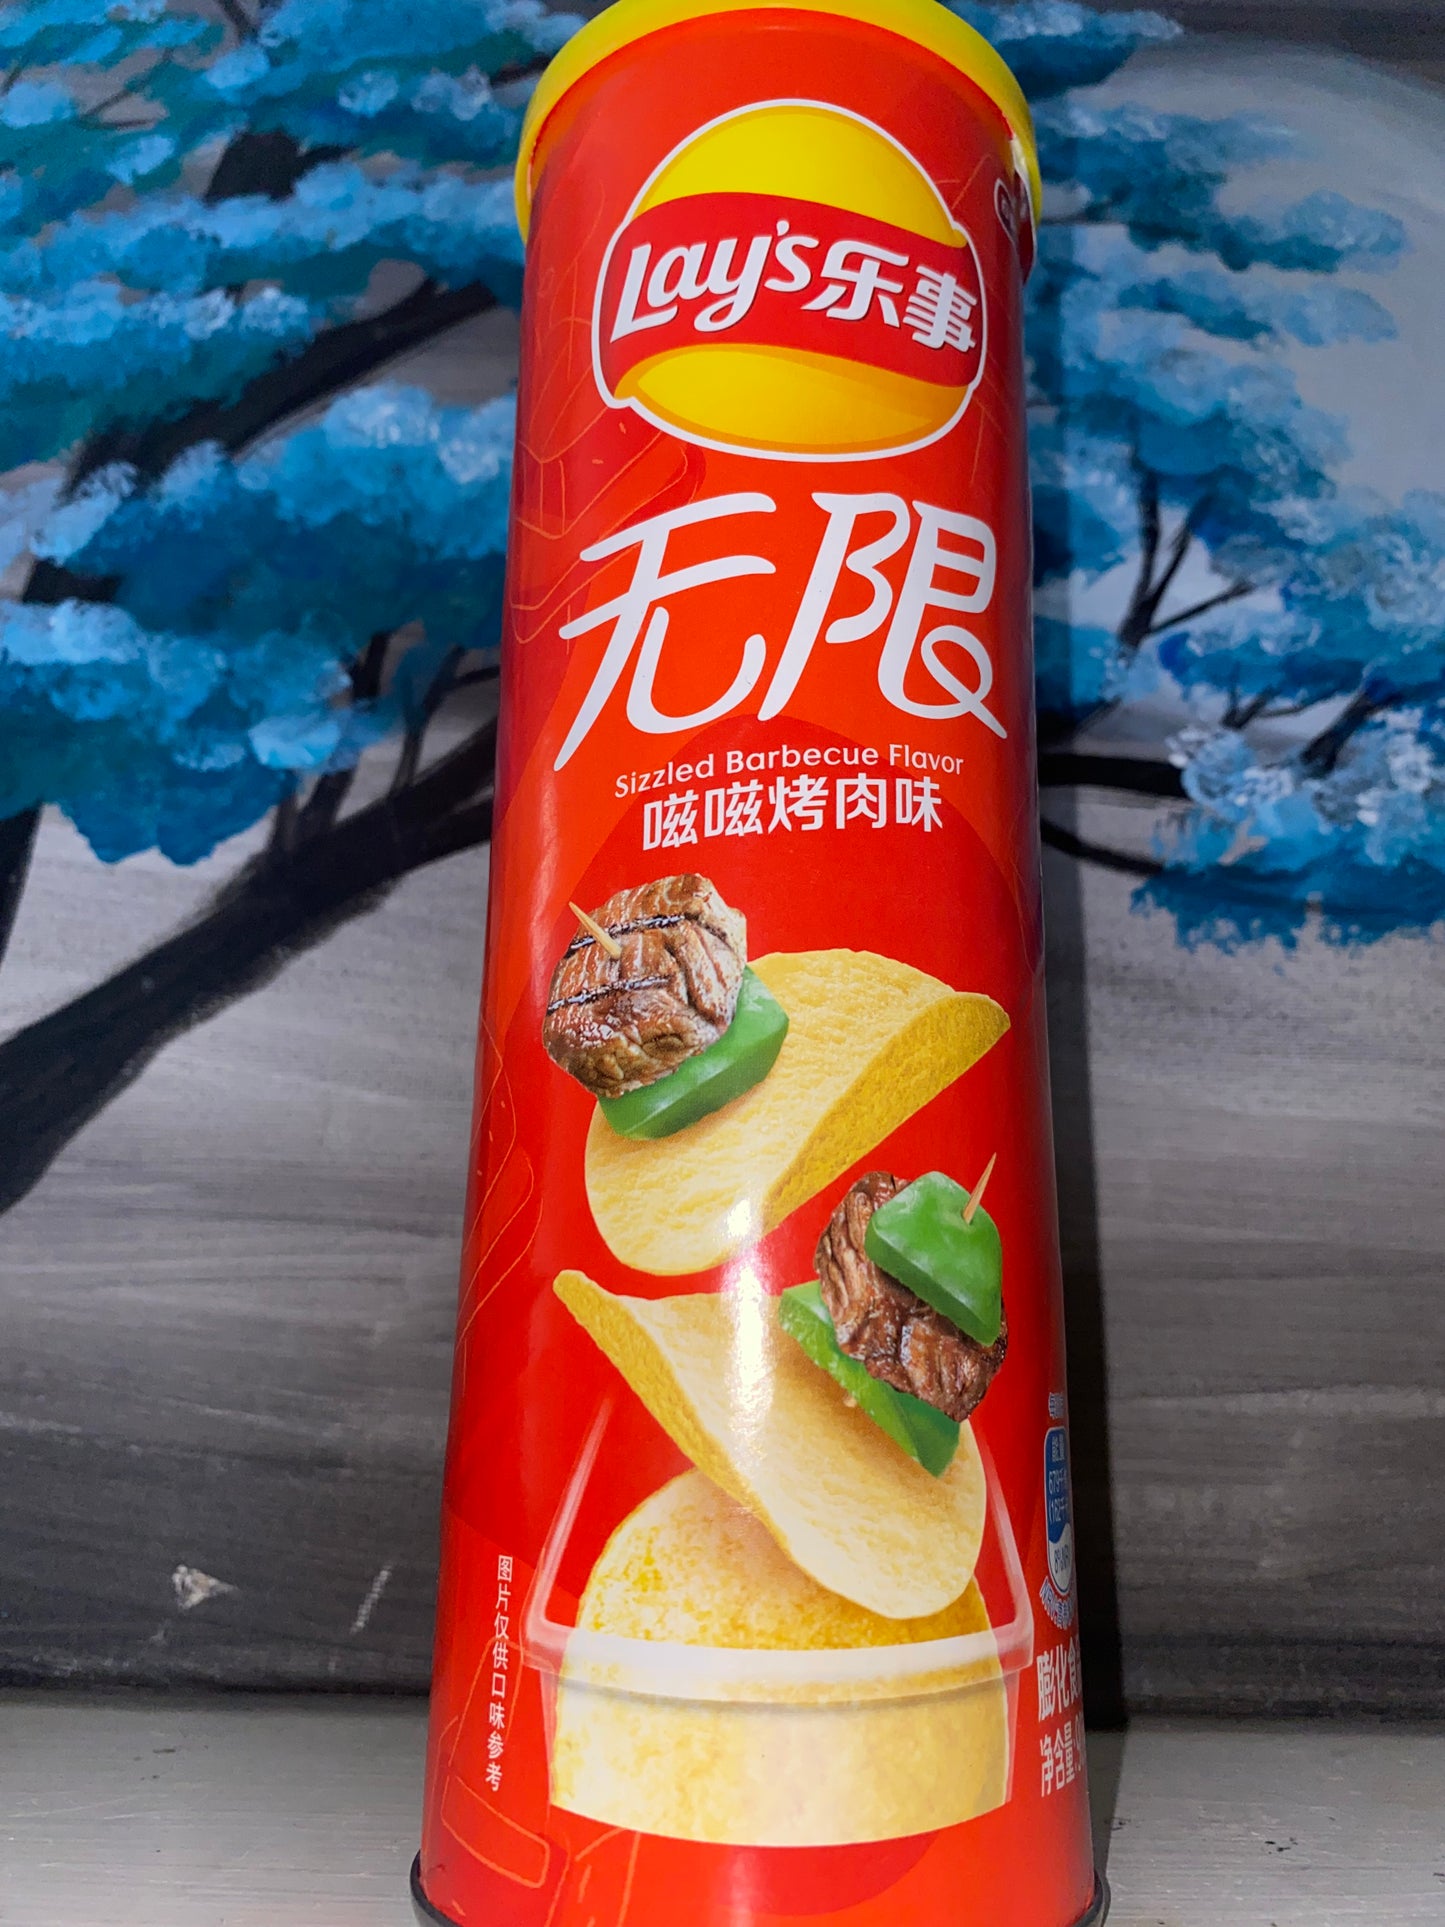 Lays Stax Sizzled Barbecue (China)